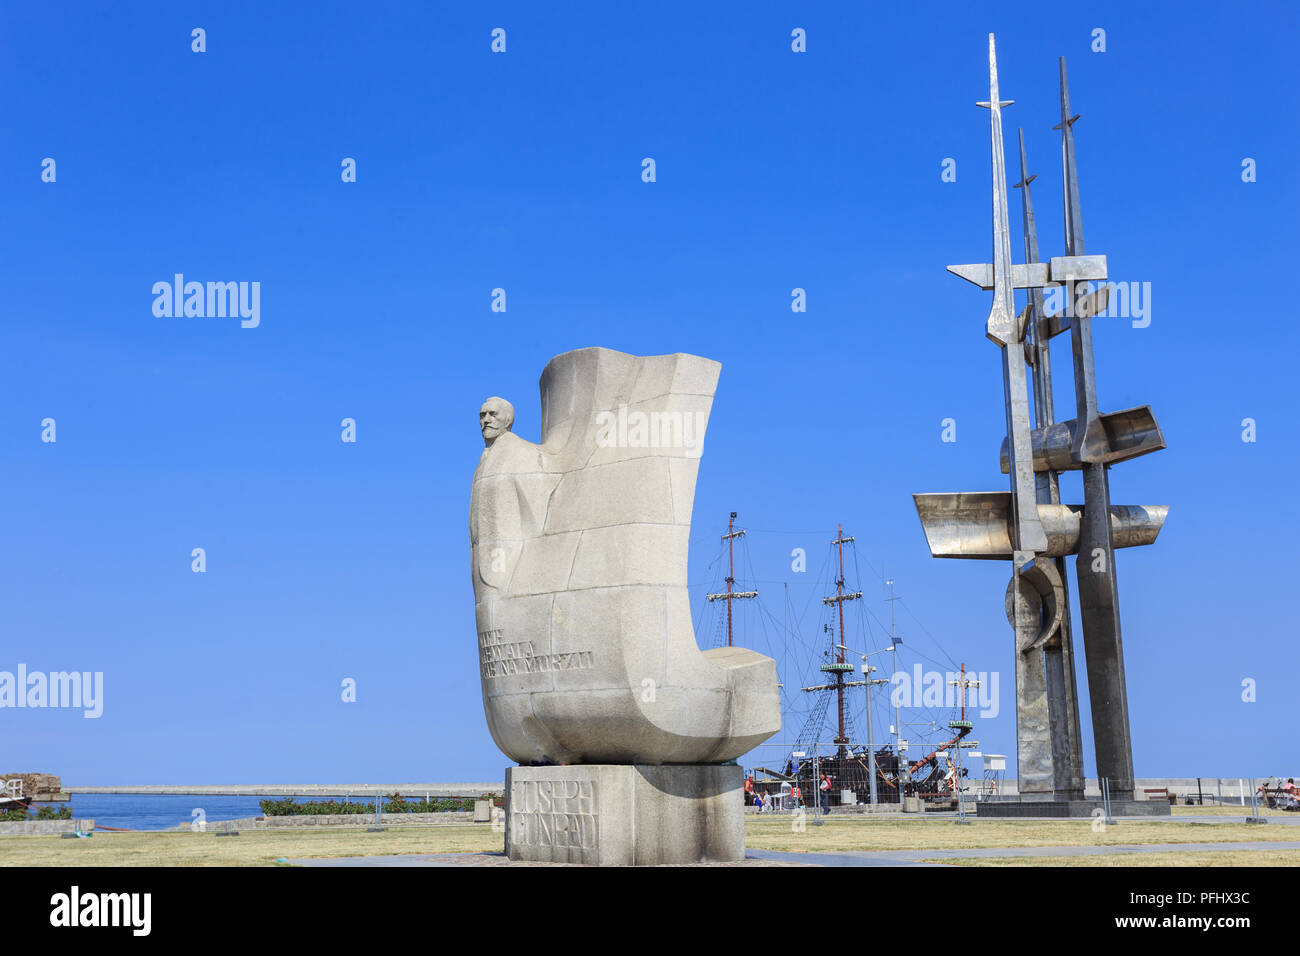 Gdynia - Two monuments located on South Pier. Monument to Polish writer Joseph Conrad and monument 'Game of Masts' Stock Photo